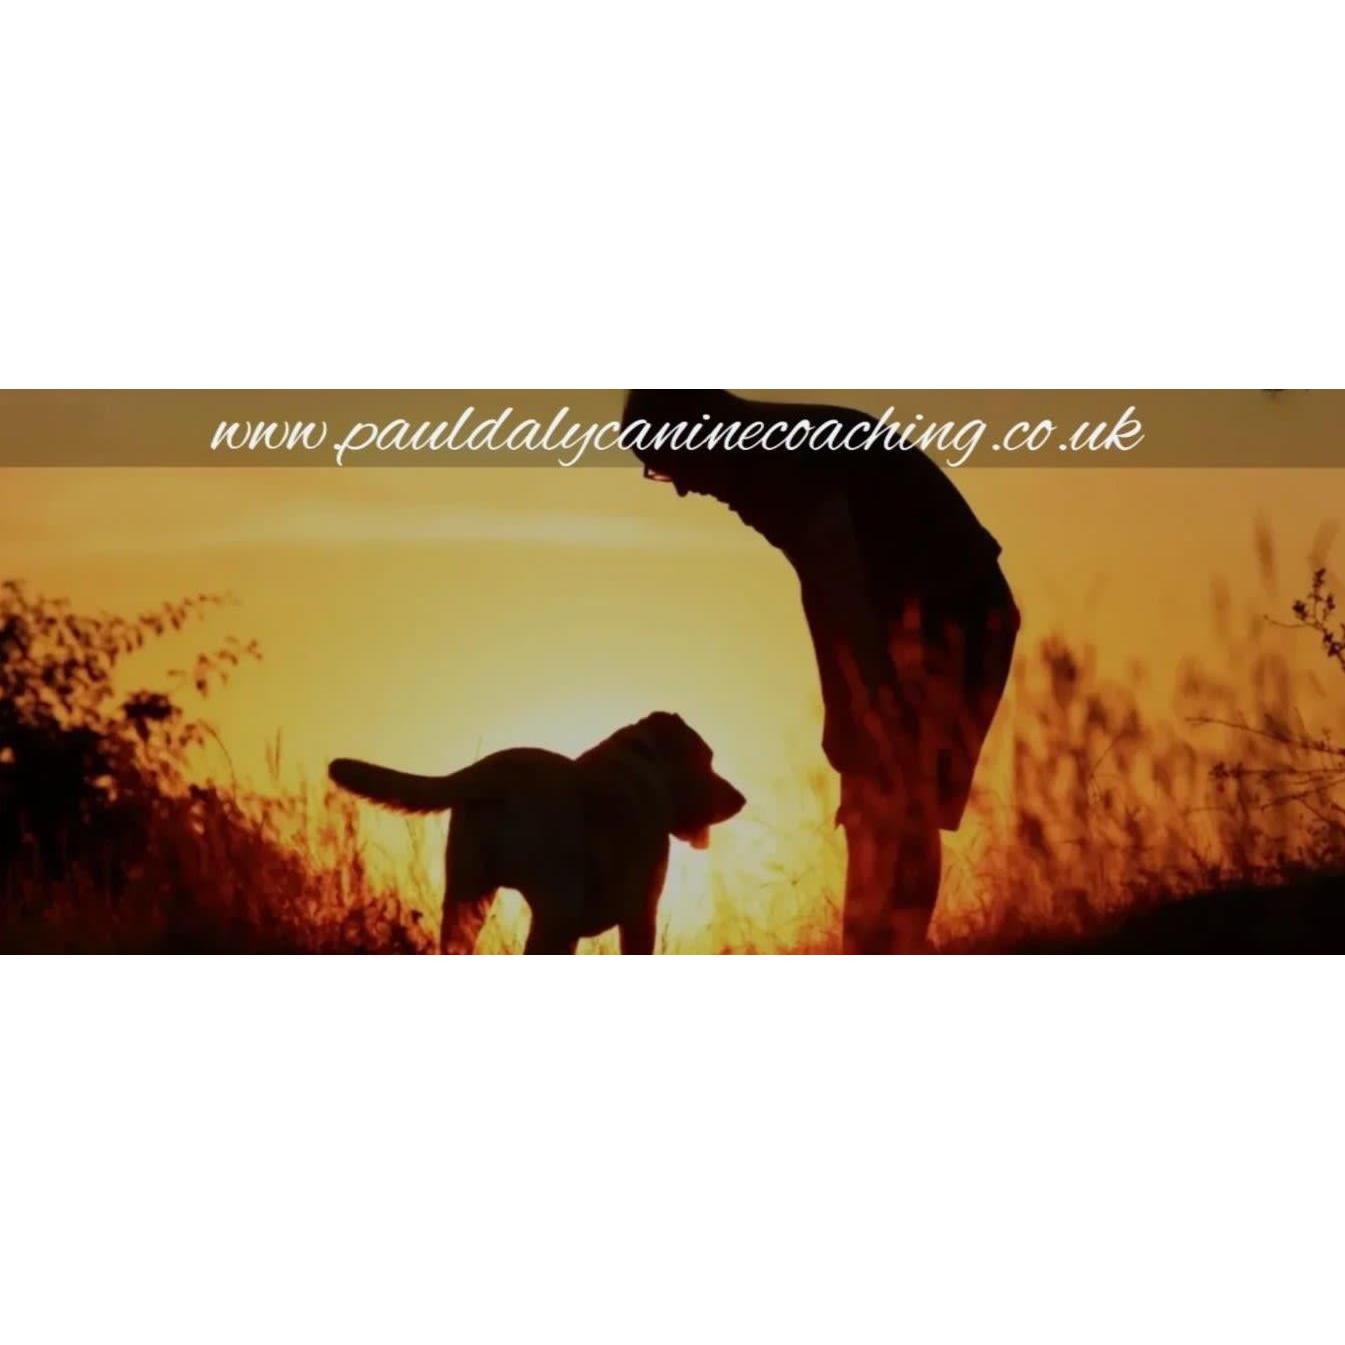 Canine Coaching - Daventry, Northamptonshire NN11 6UX - 07765 987966 | ShowMeLocal.com